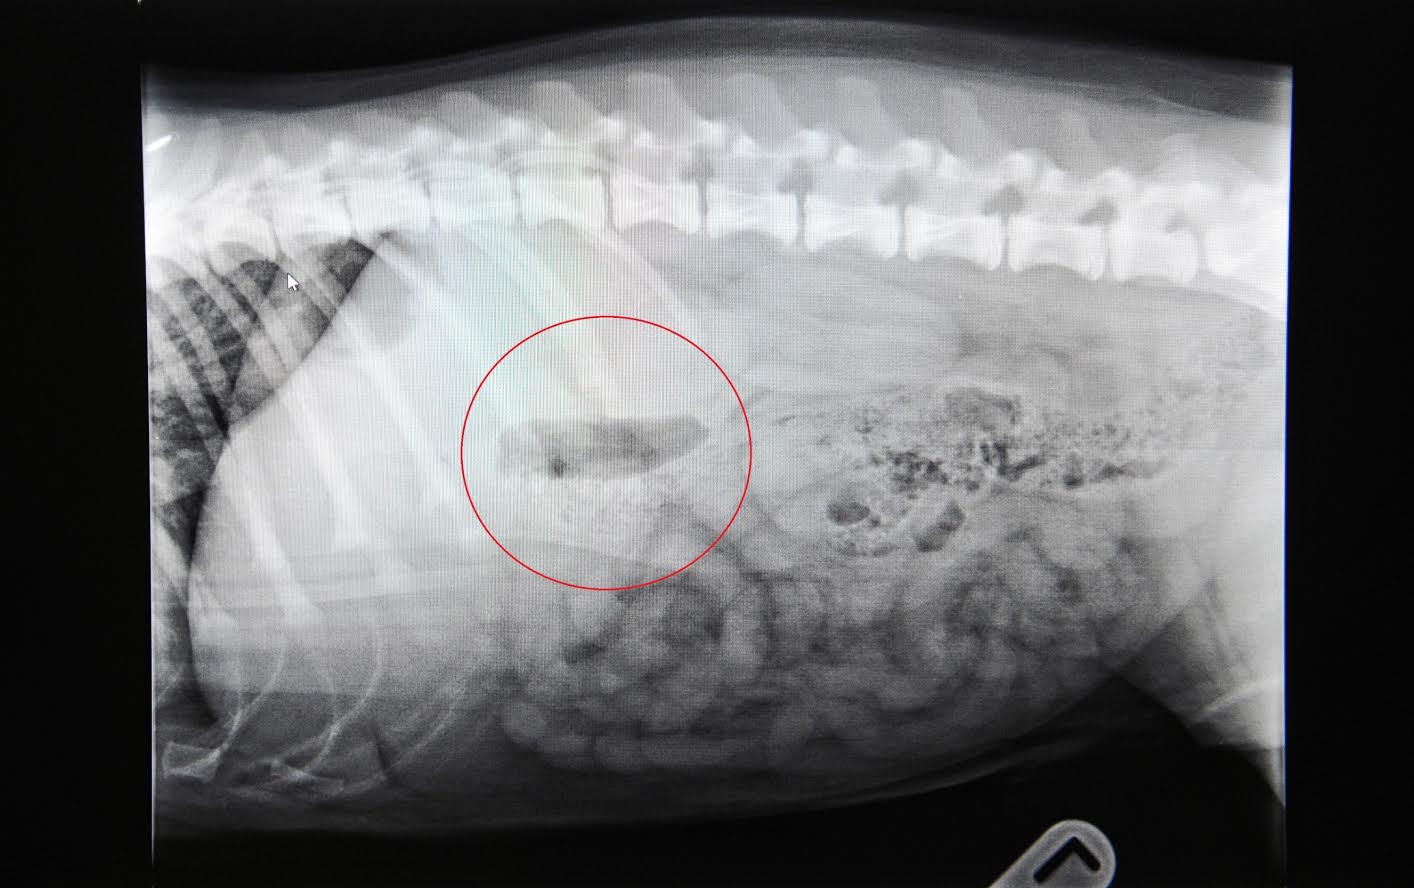 My Dog Swallowed a Squeaker What Should I Do?